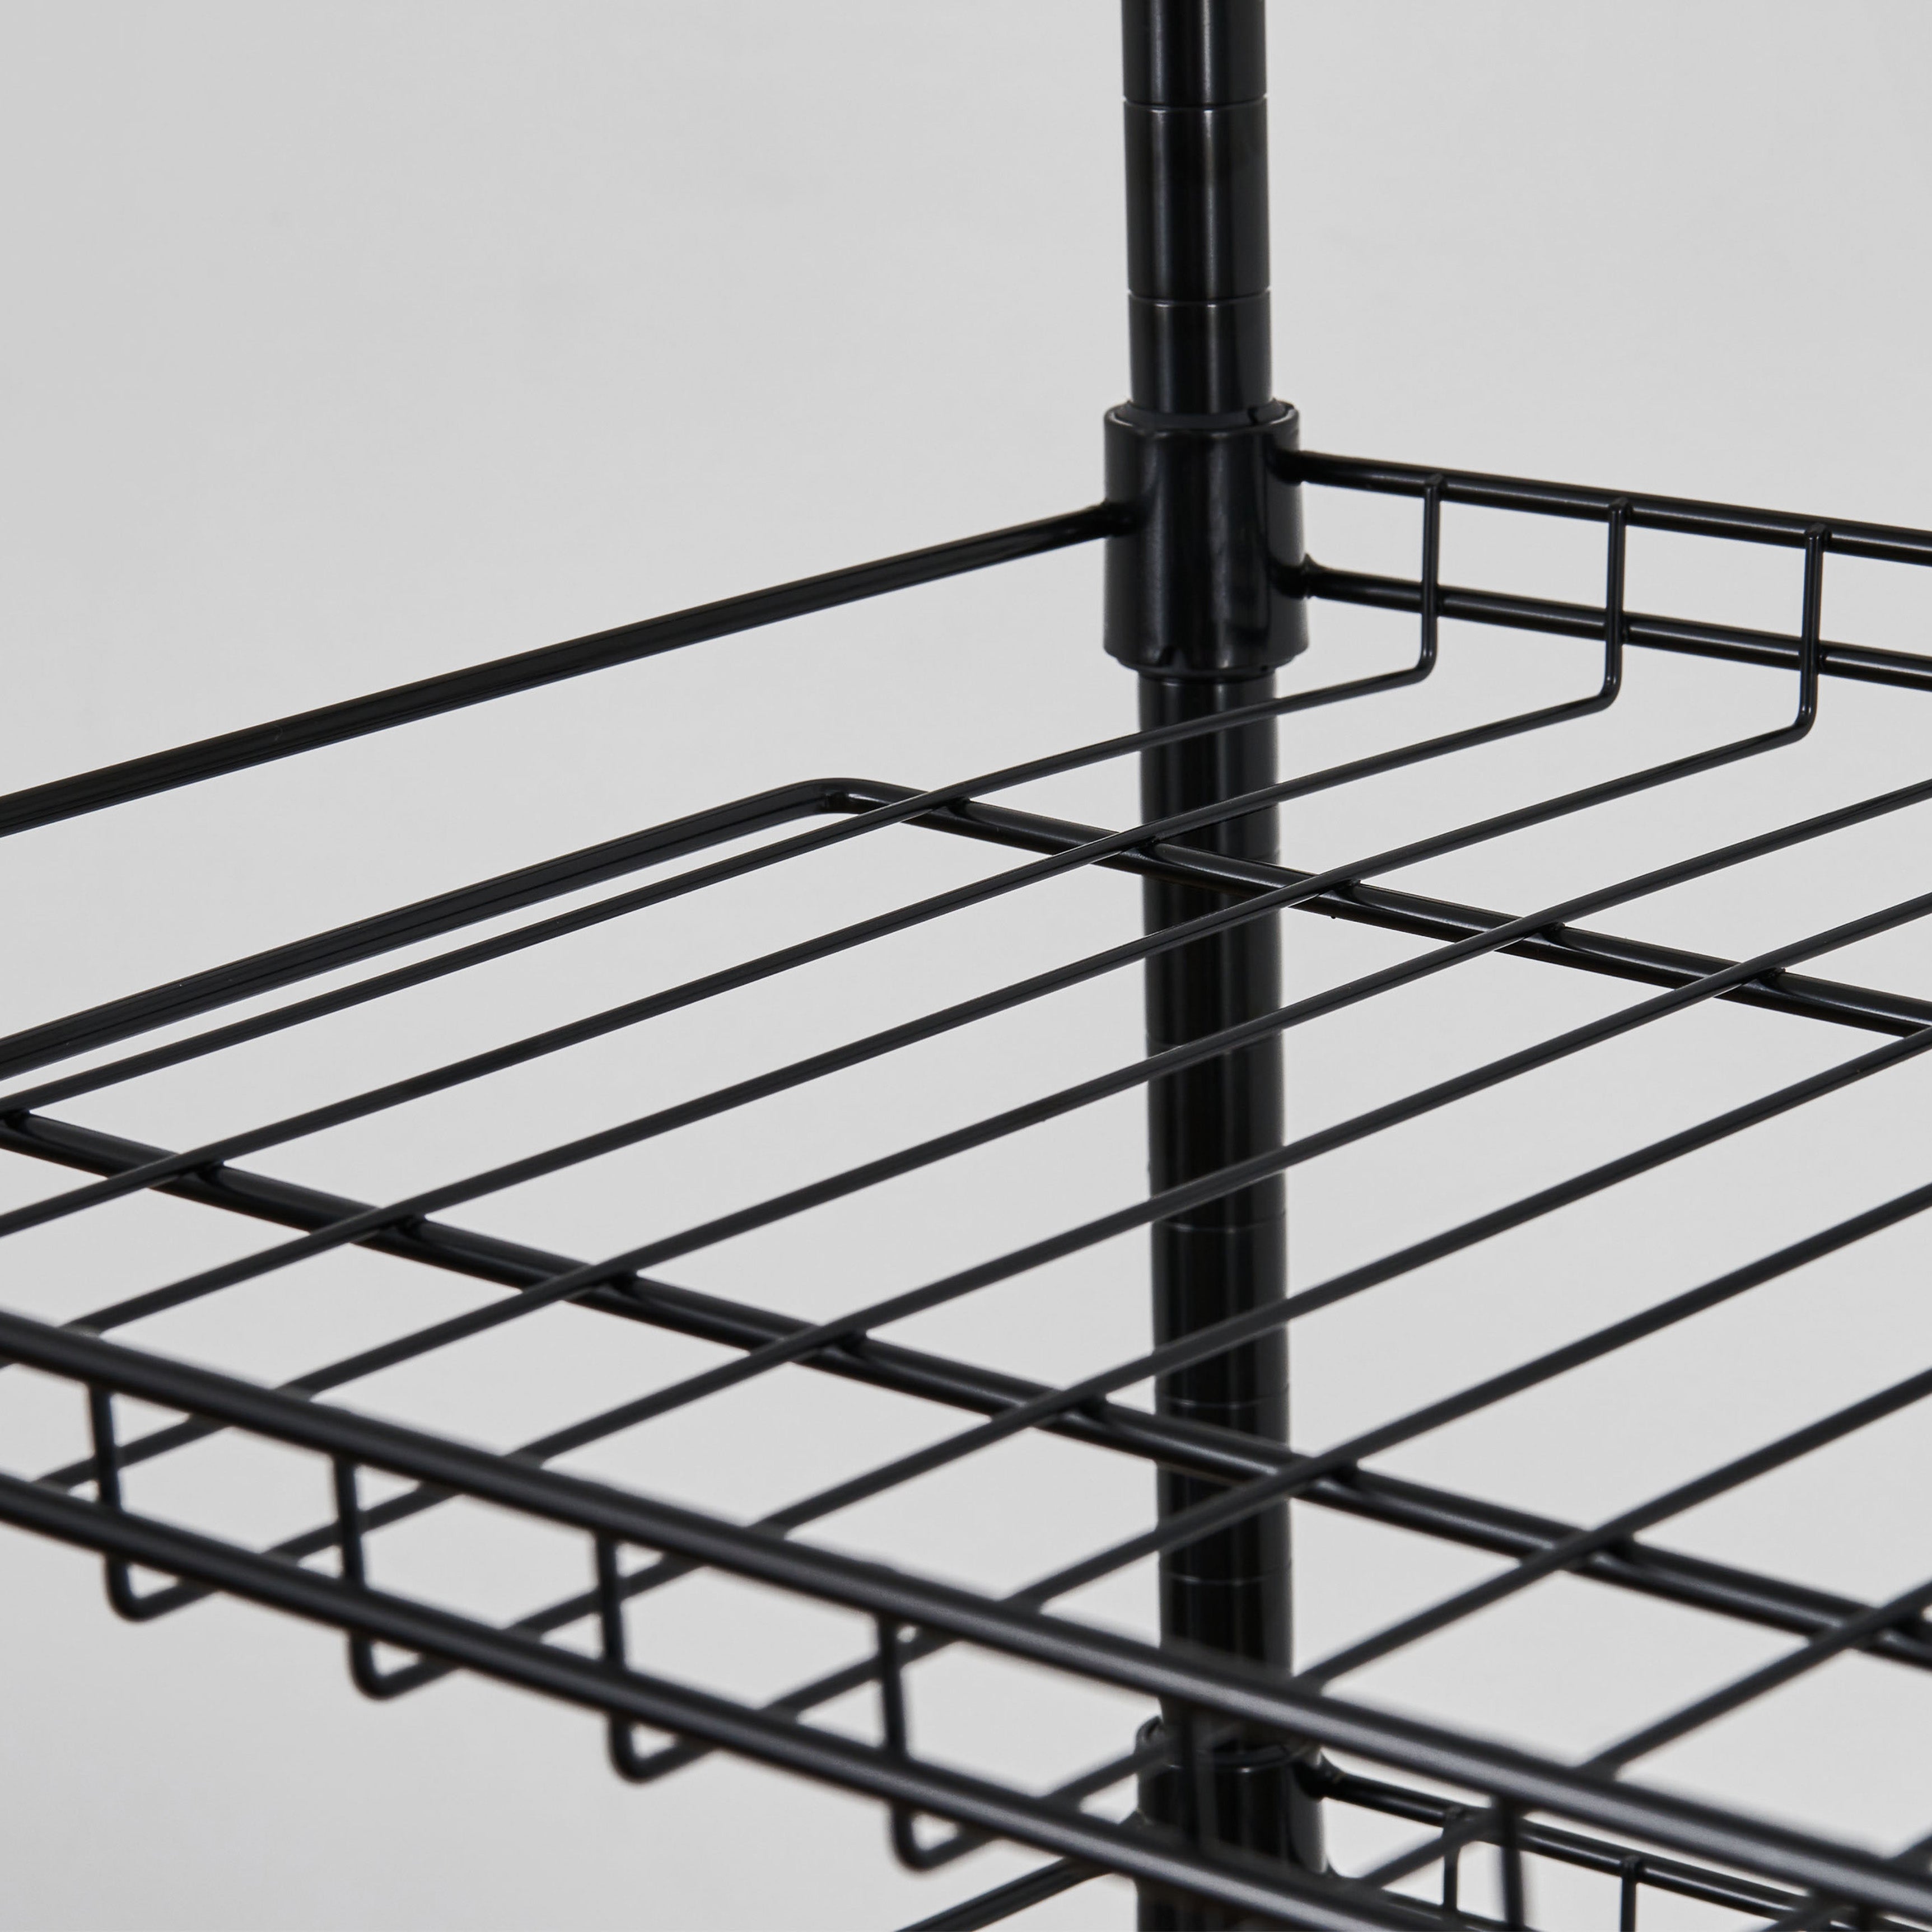 Pantry Rack (10 - Tier) - Wire Shelving